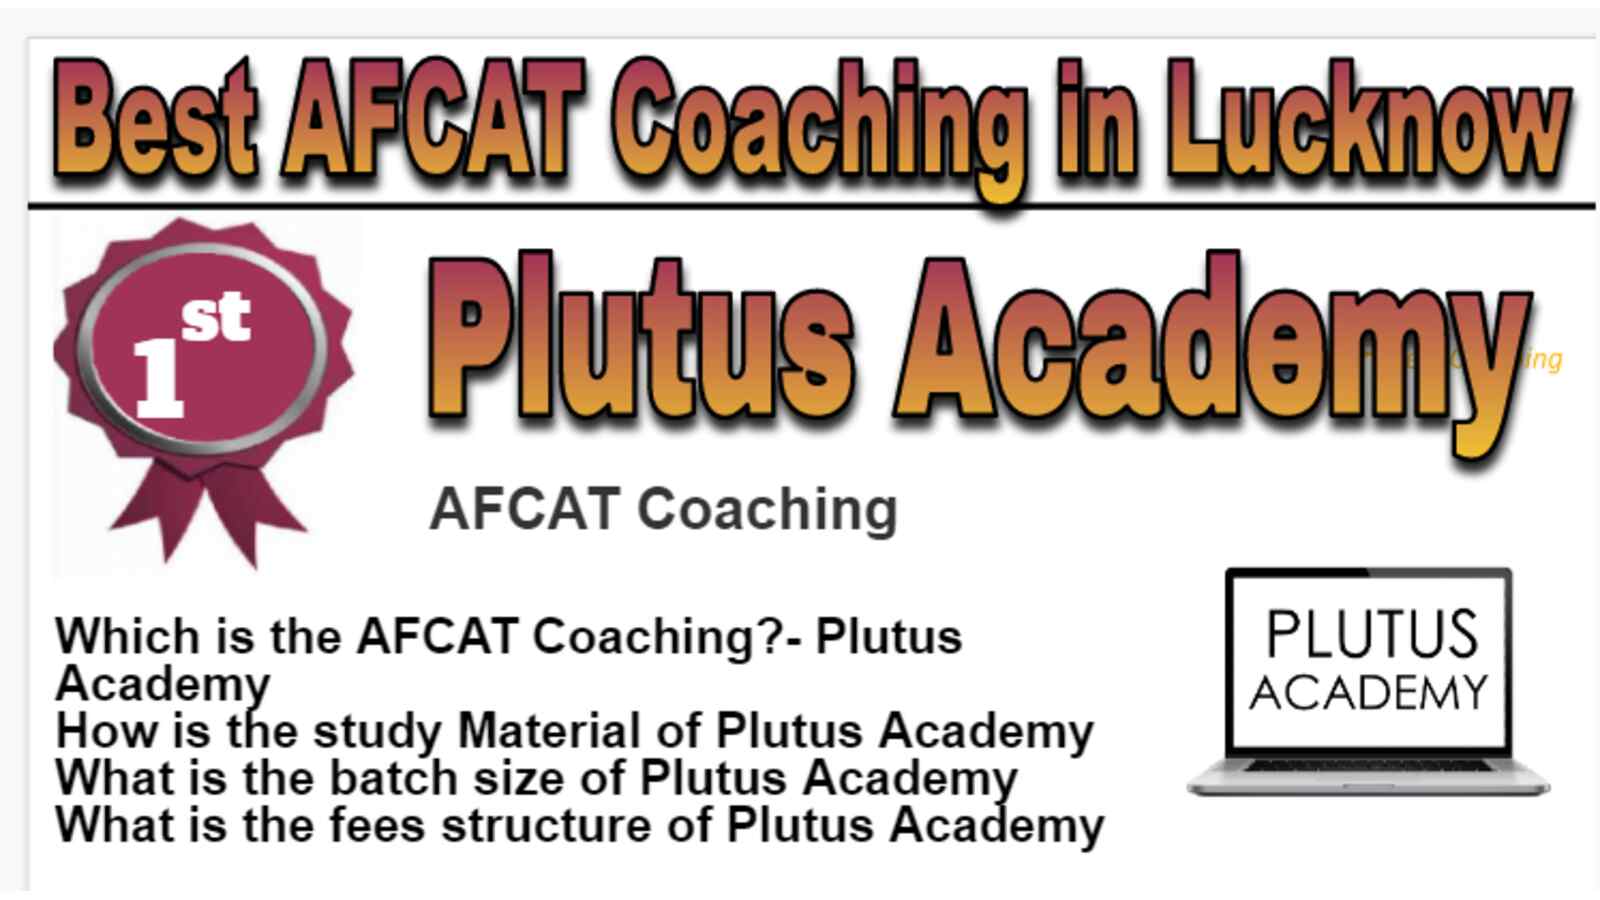 Rank 1 Best AFCAT Coaching in Lucknow